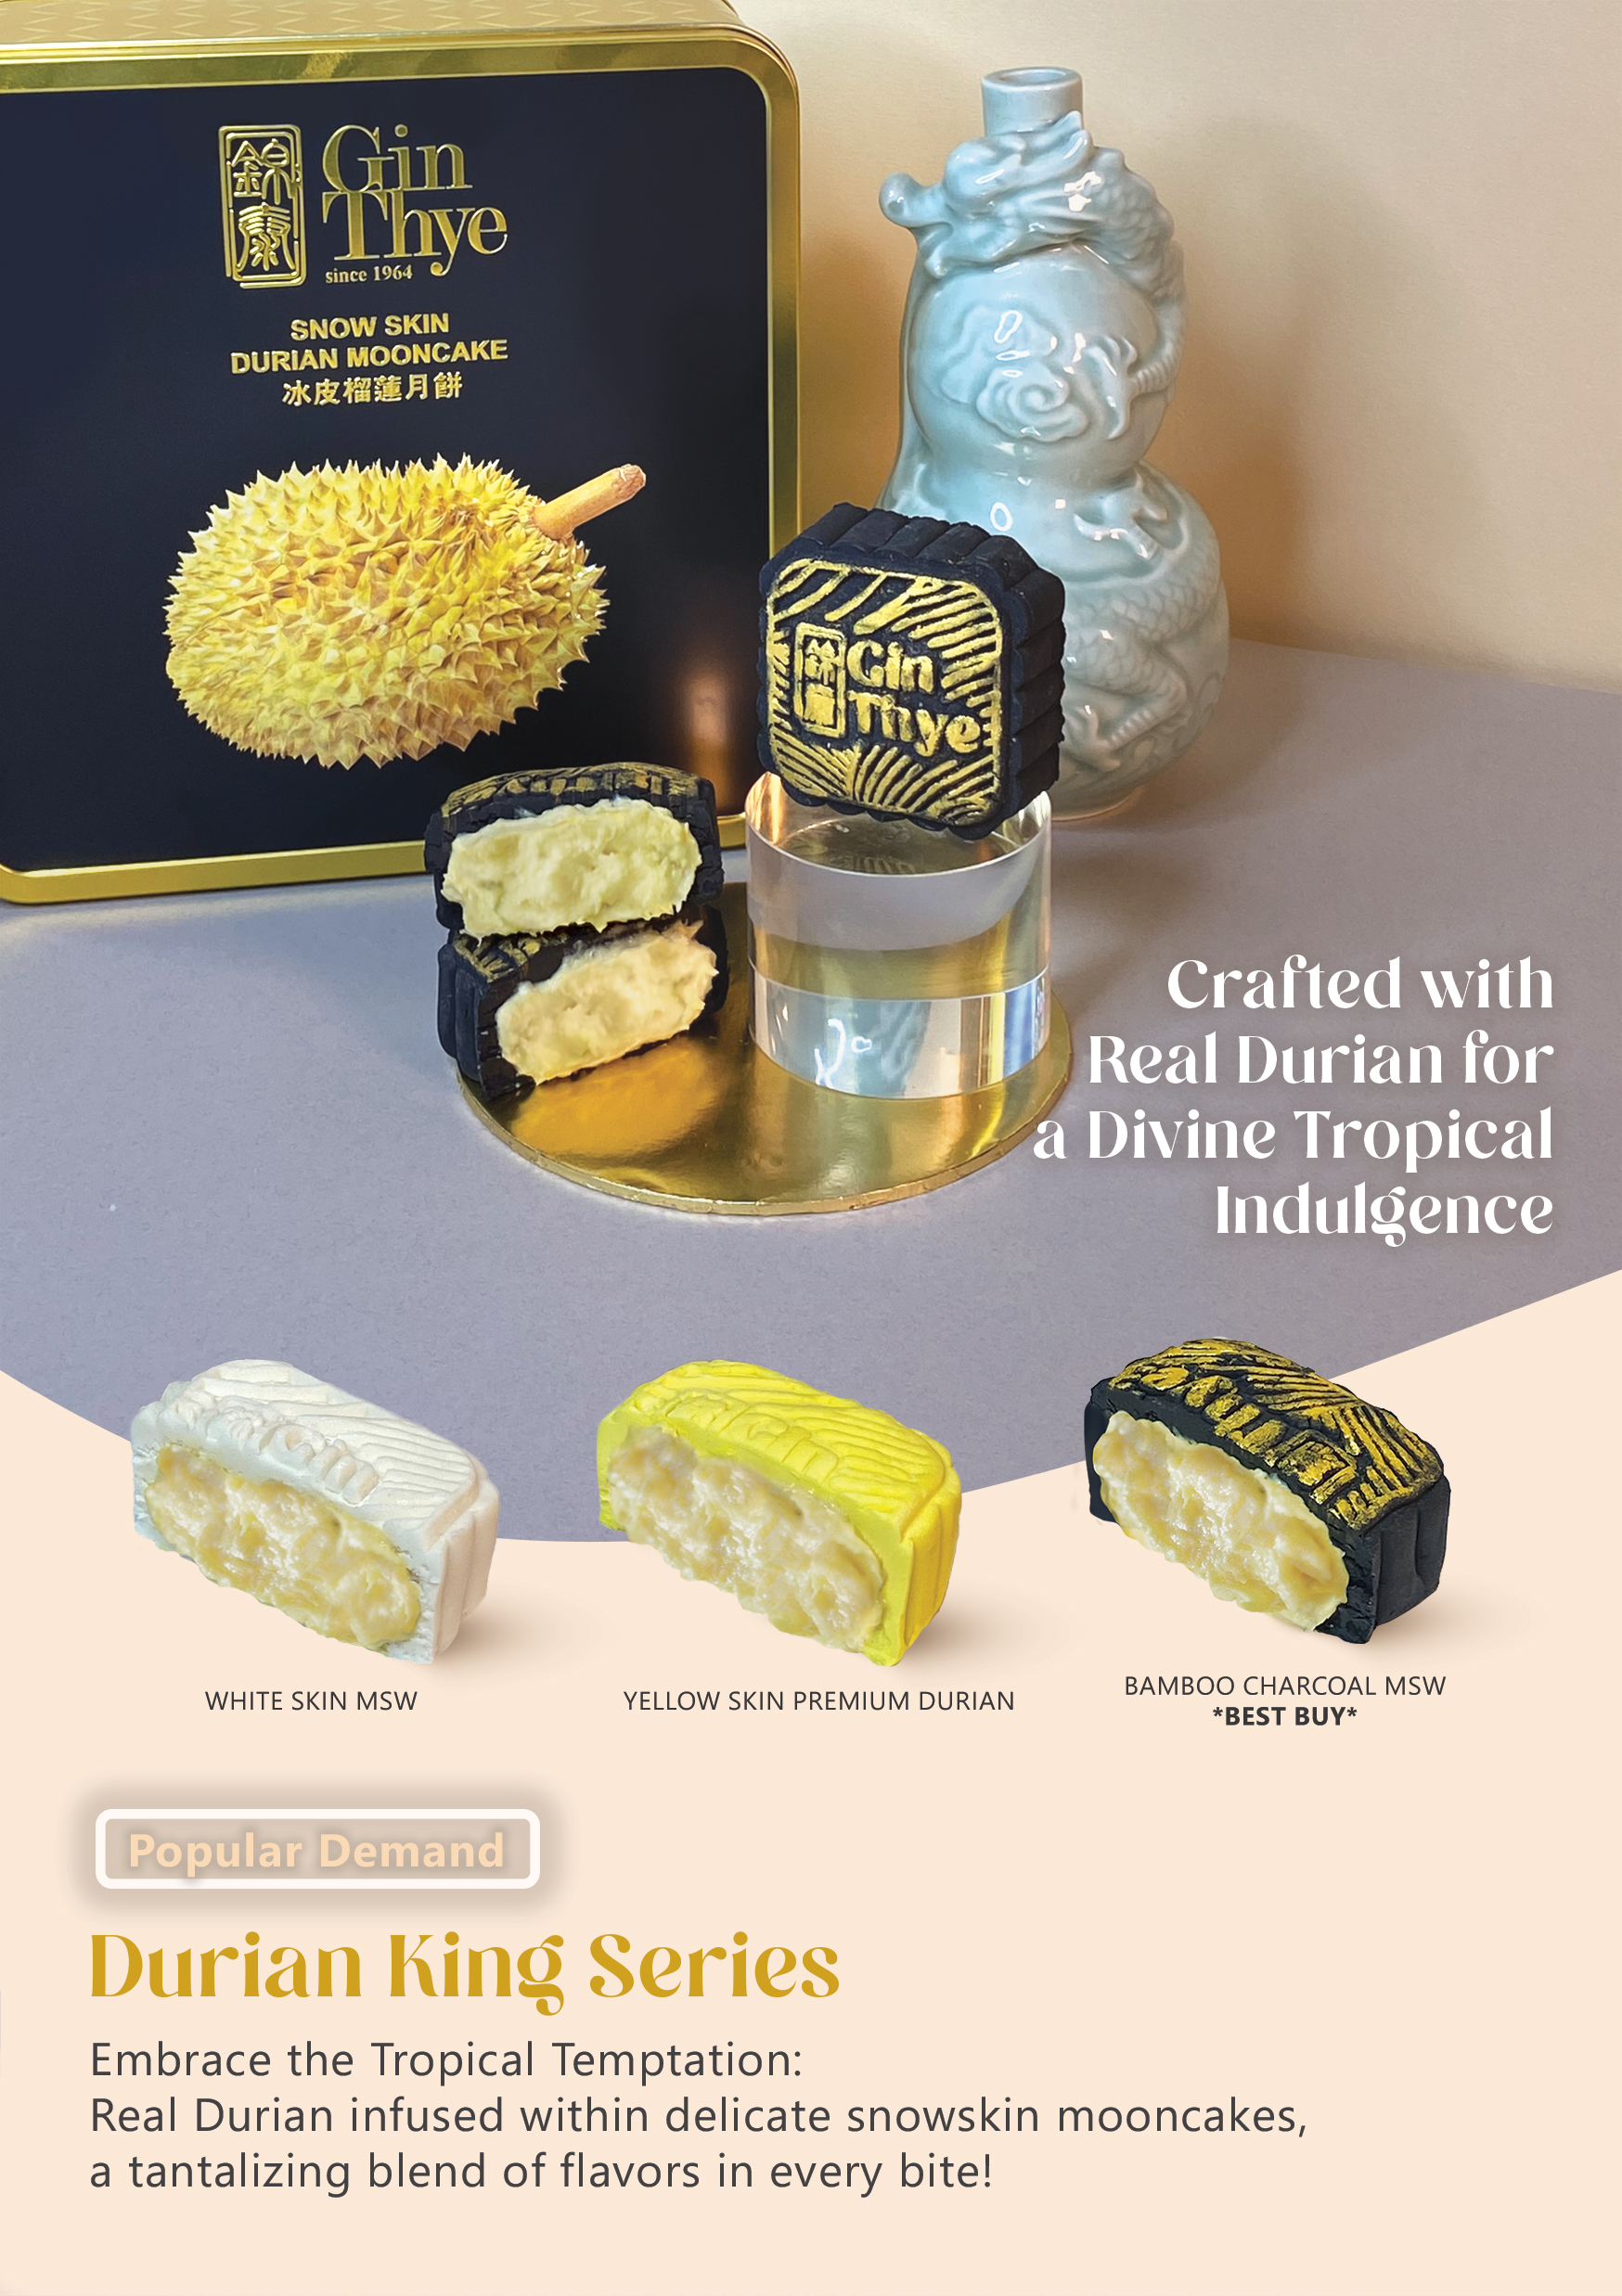 Crafted with Real Durian for a Divine Tropical Indulgence